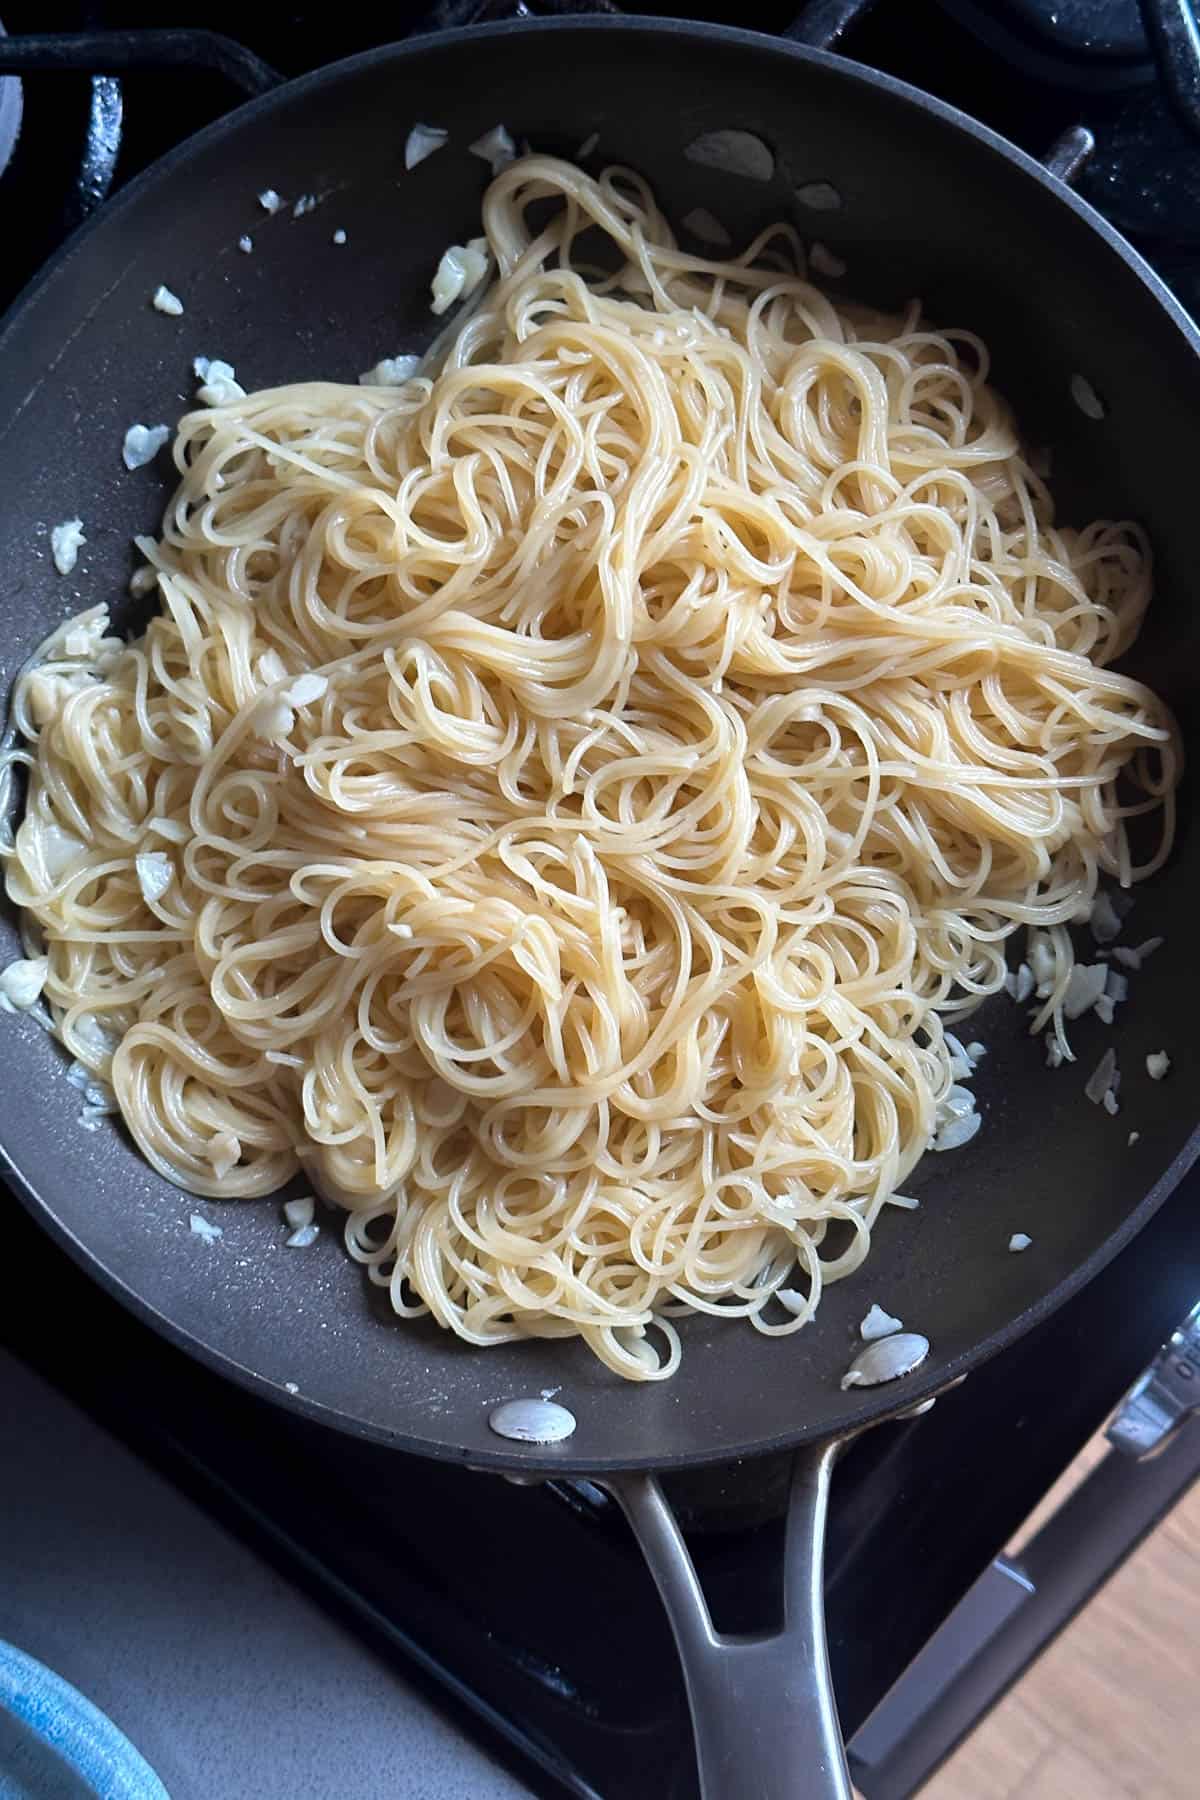 Cooking the angel hair pasta in the garlic and butter soy sauce mixture.